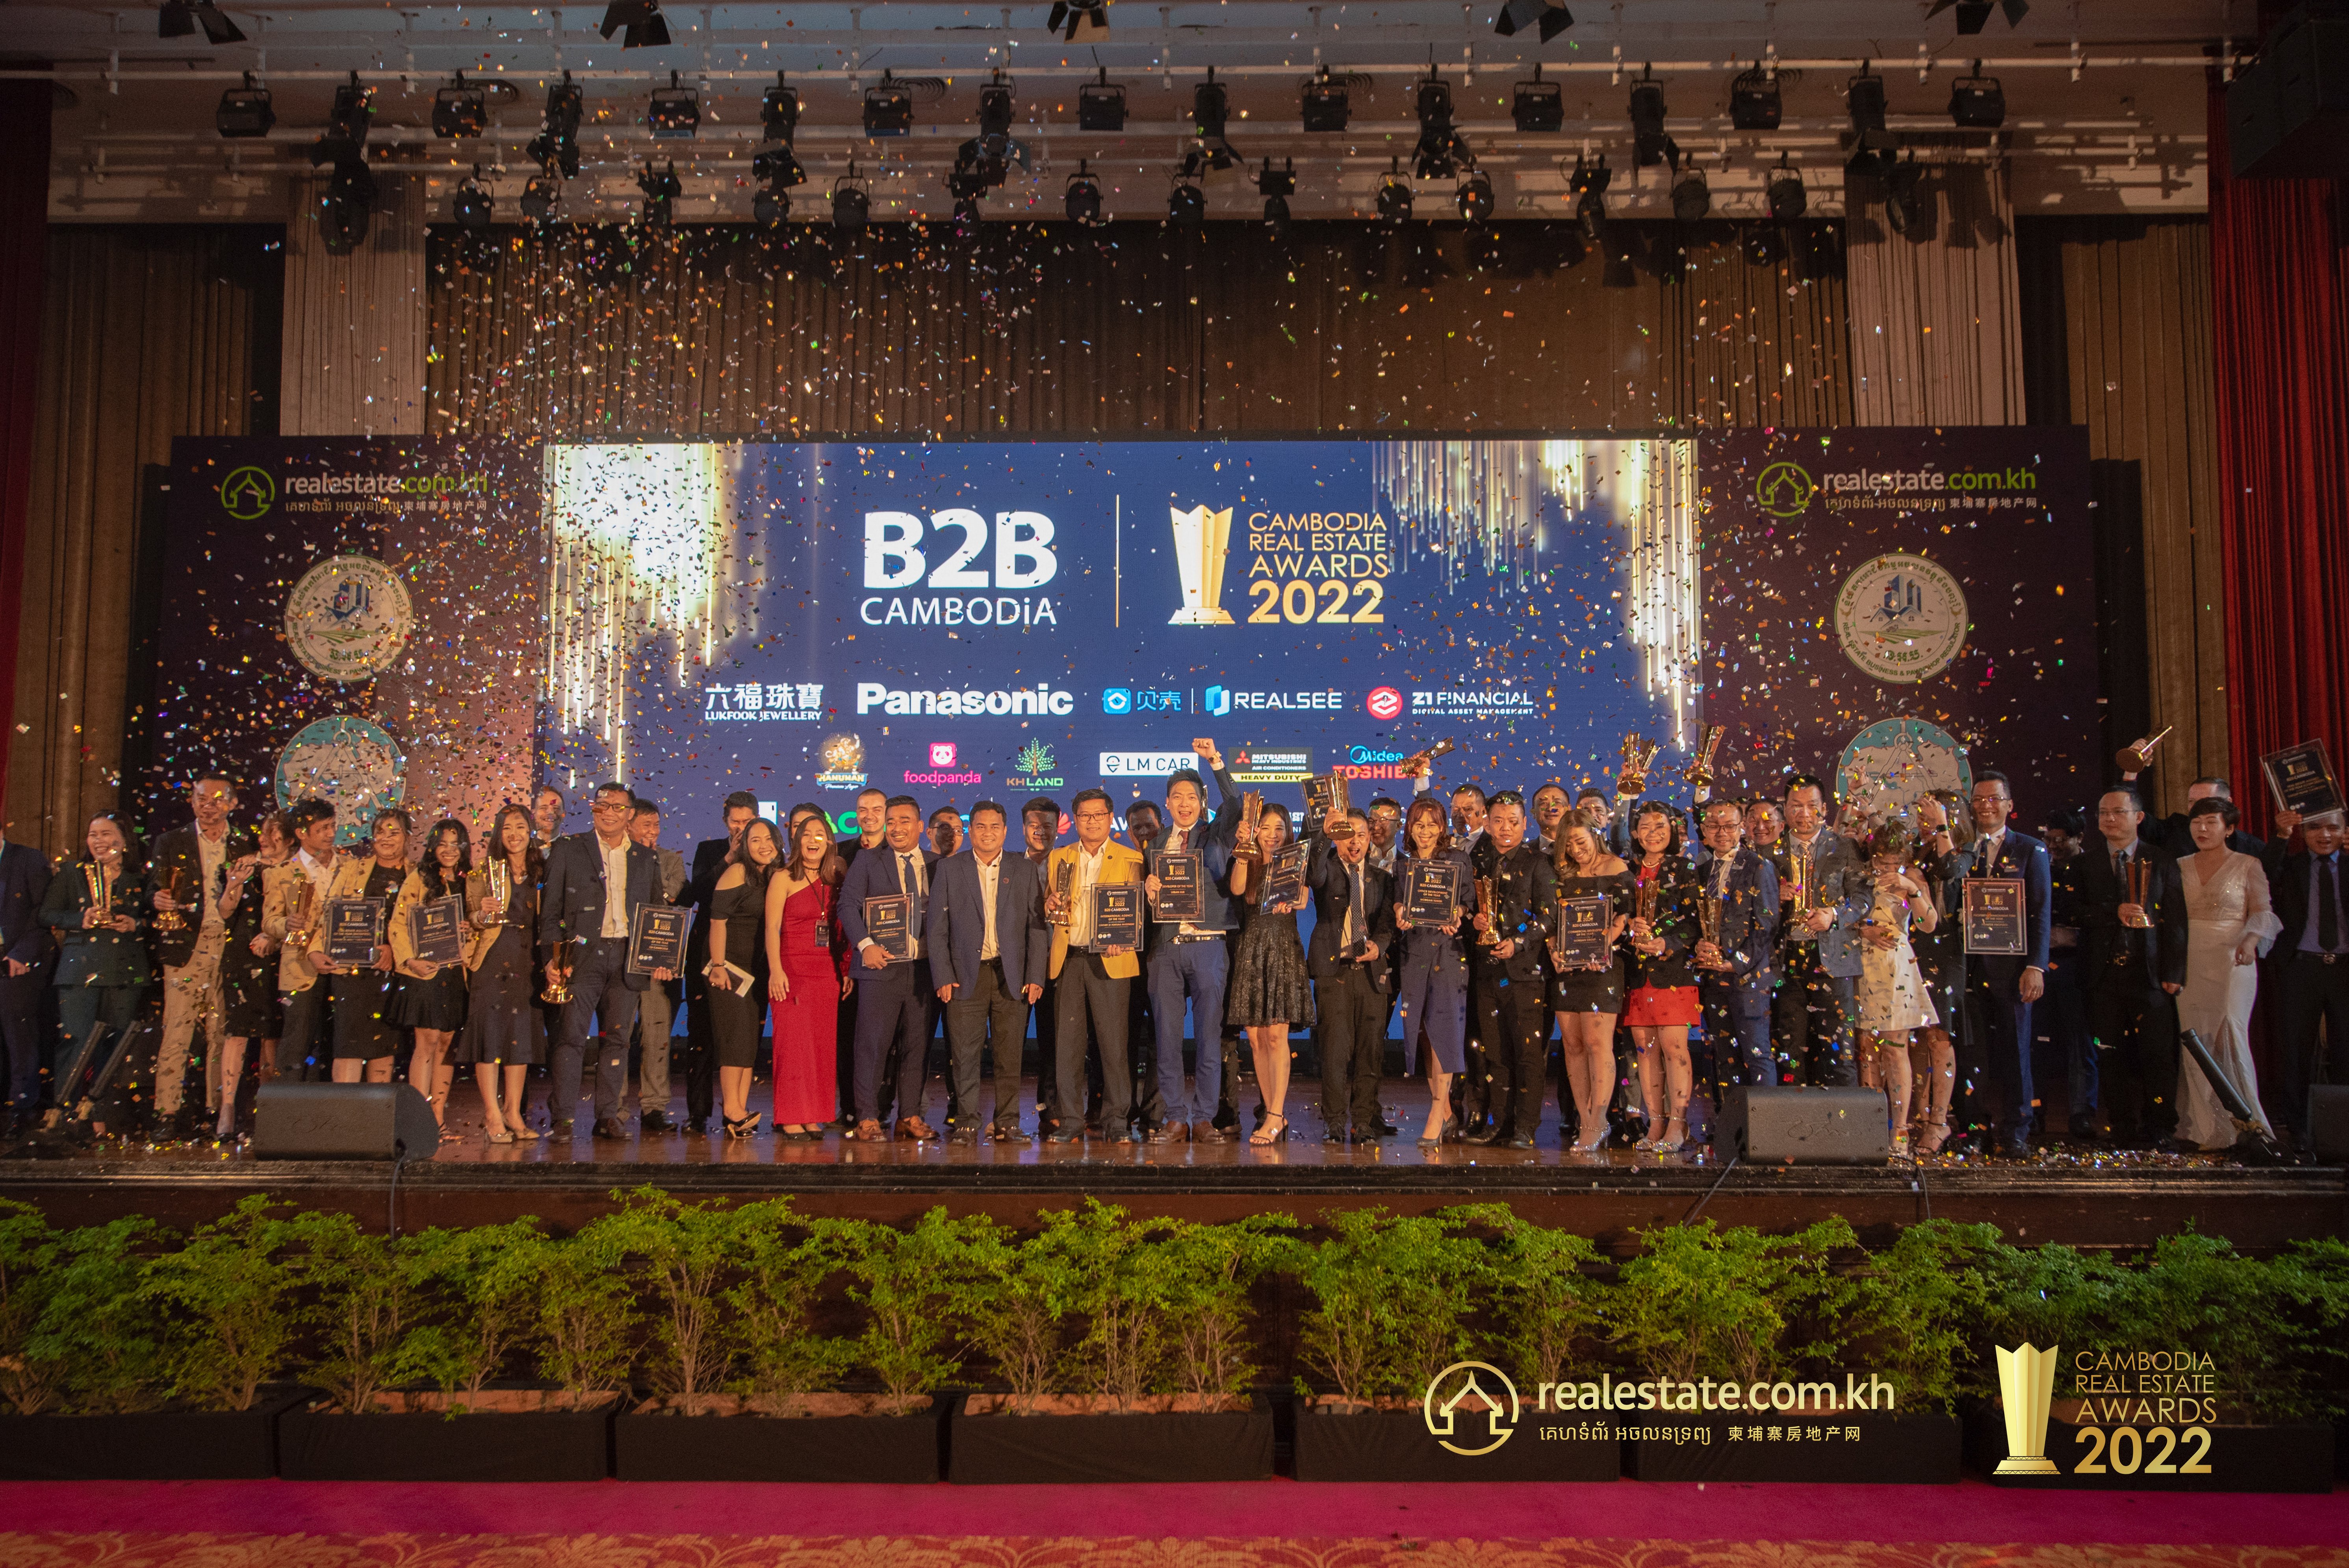 Nominations For The 2023 Cambodia Real Estate Awards, Now Open